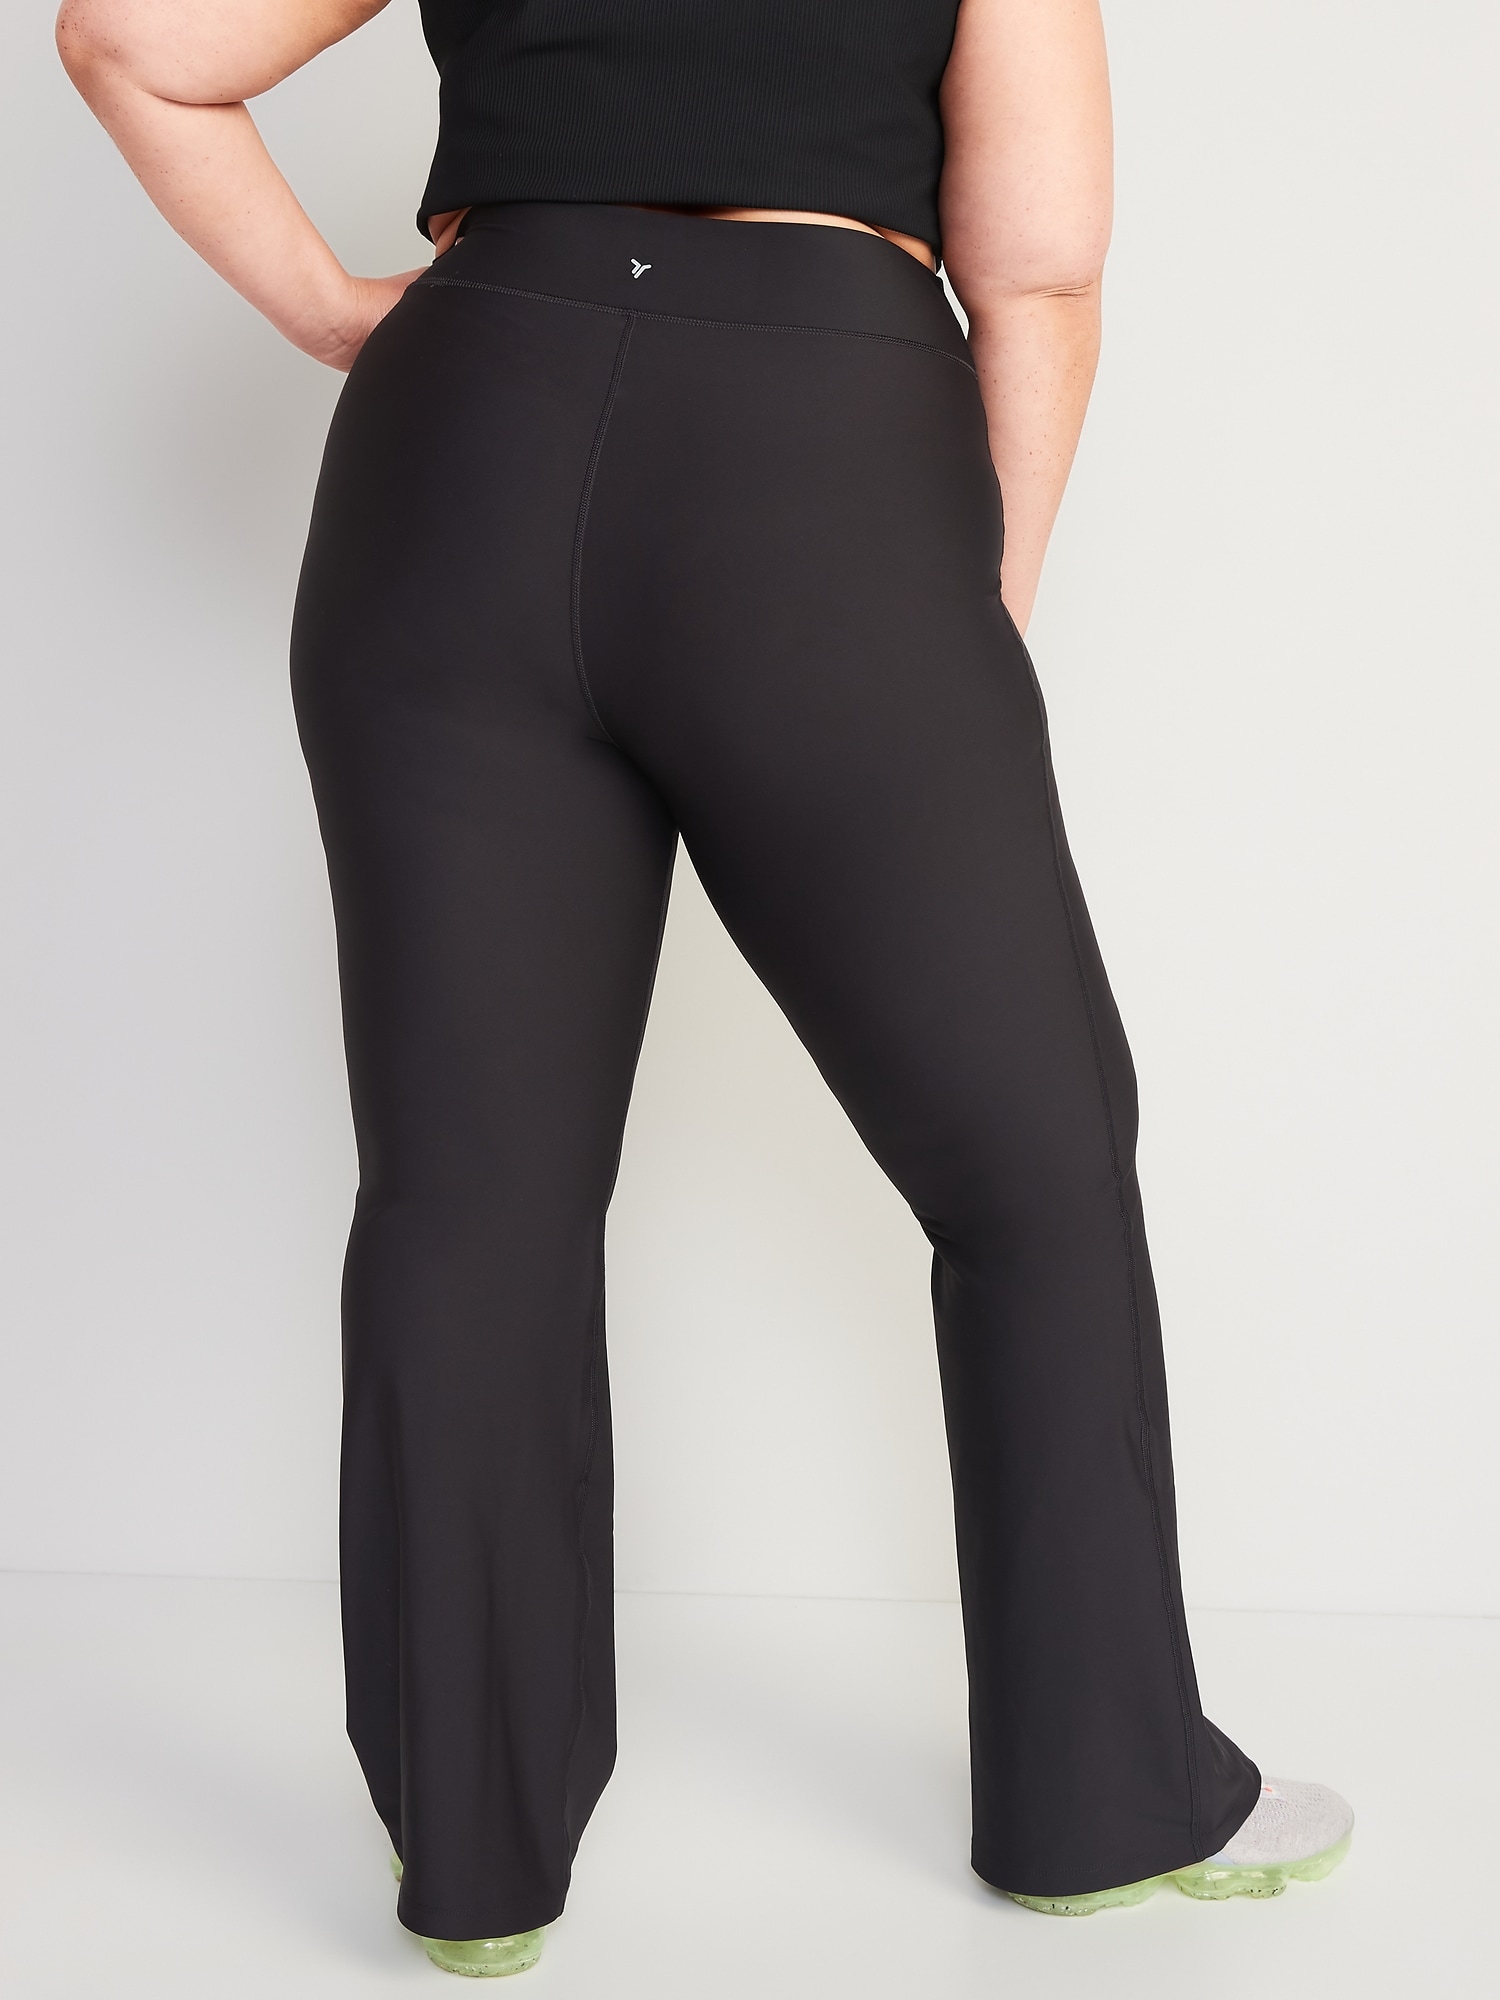 Women's Plus Size High Waist Slim Fit Flare Leggings With Pockets